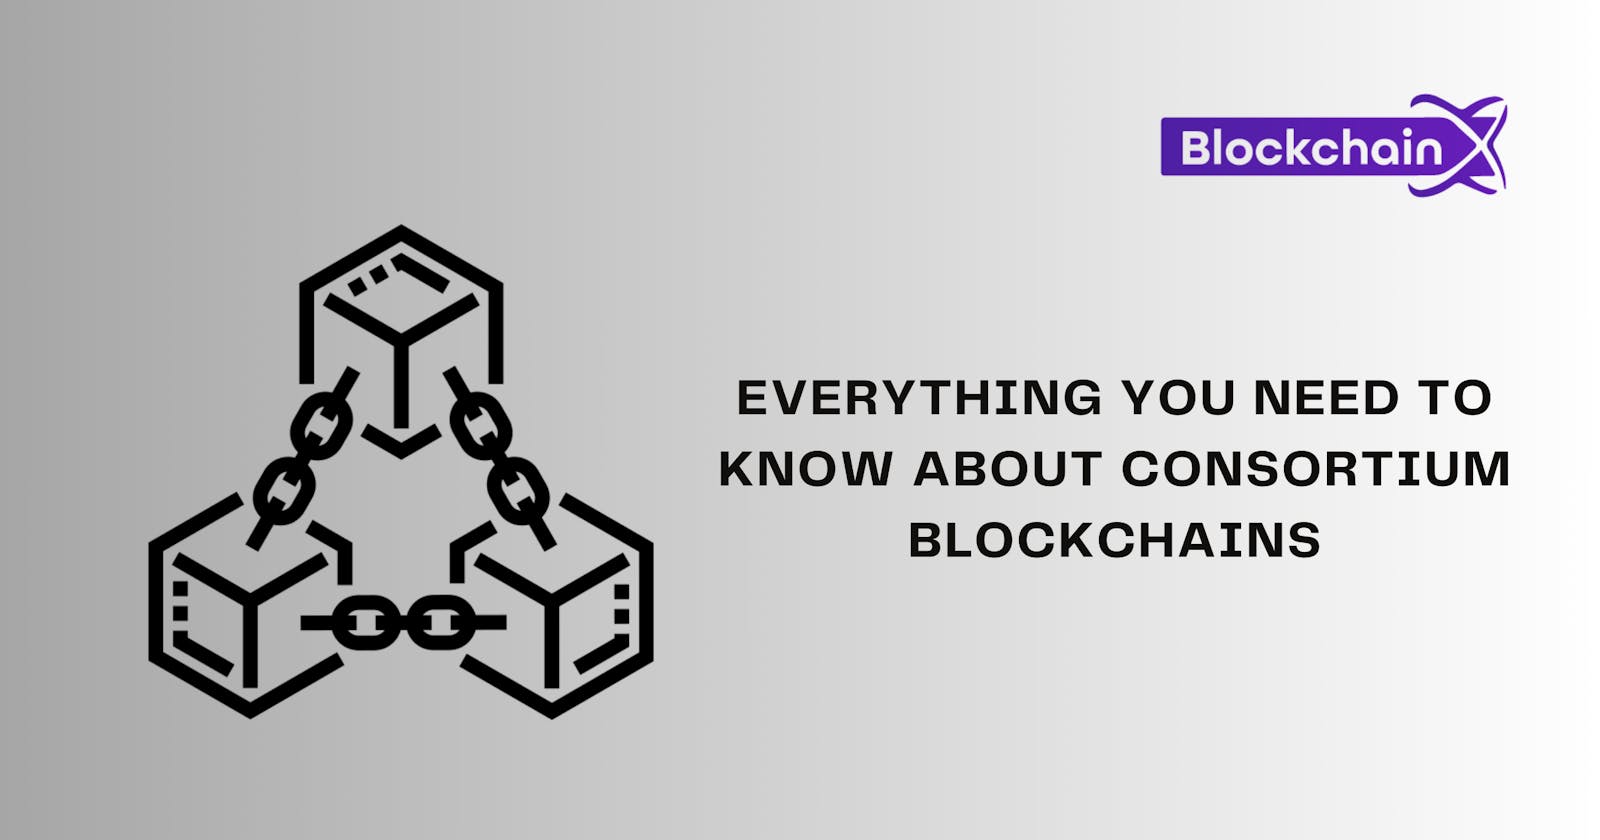 Everything you need to know about consortium blockchains